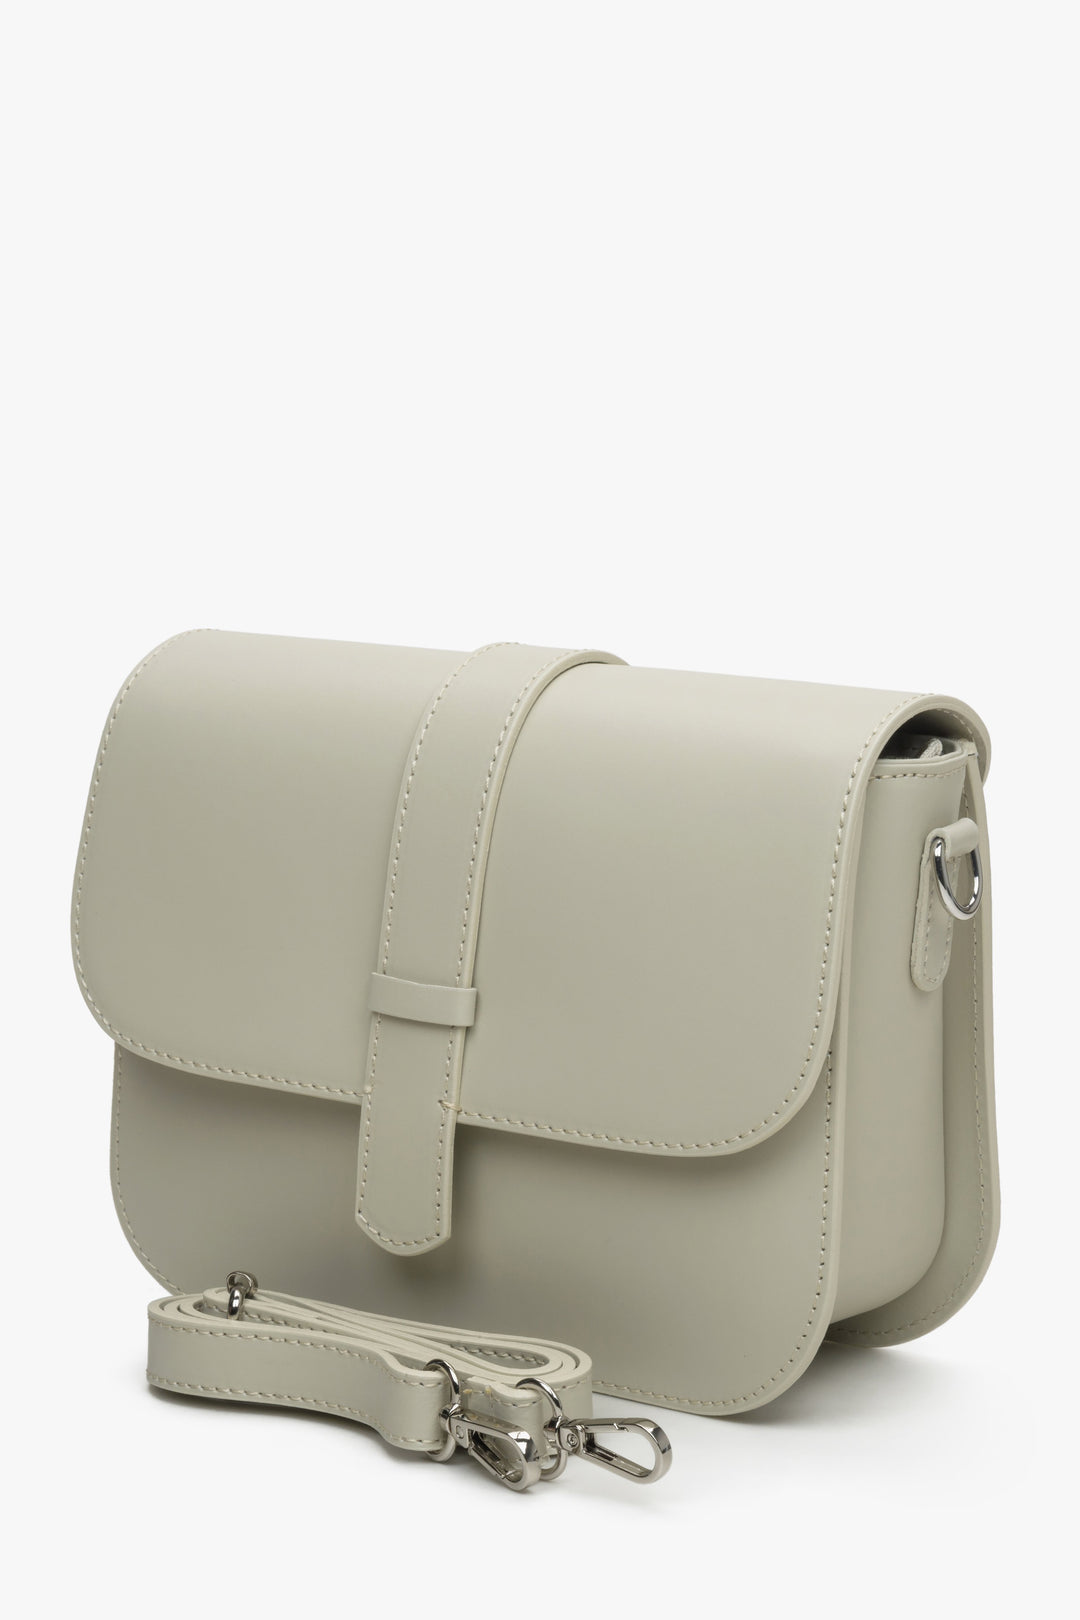 Women's grey and beige leather handbag by Estro with silver fittings.